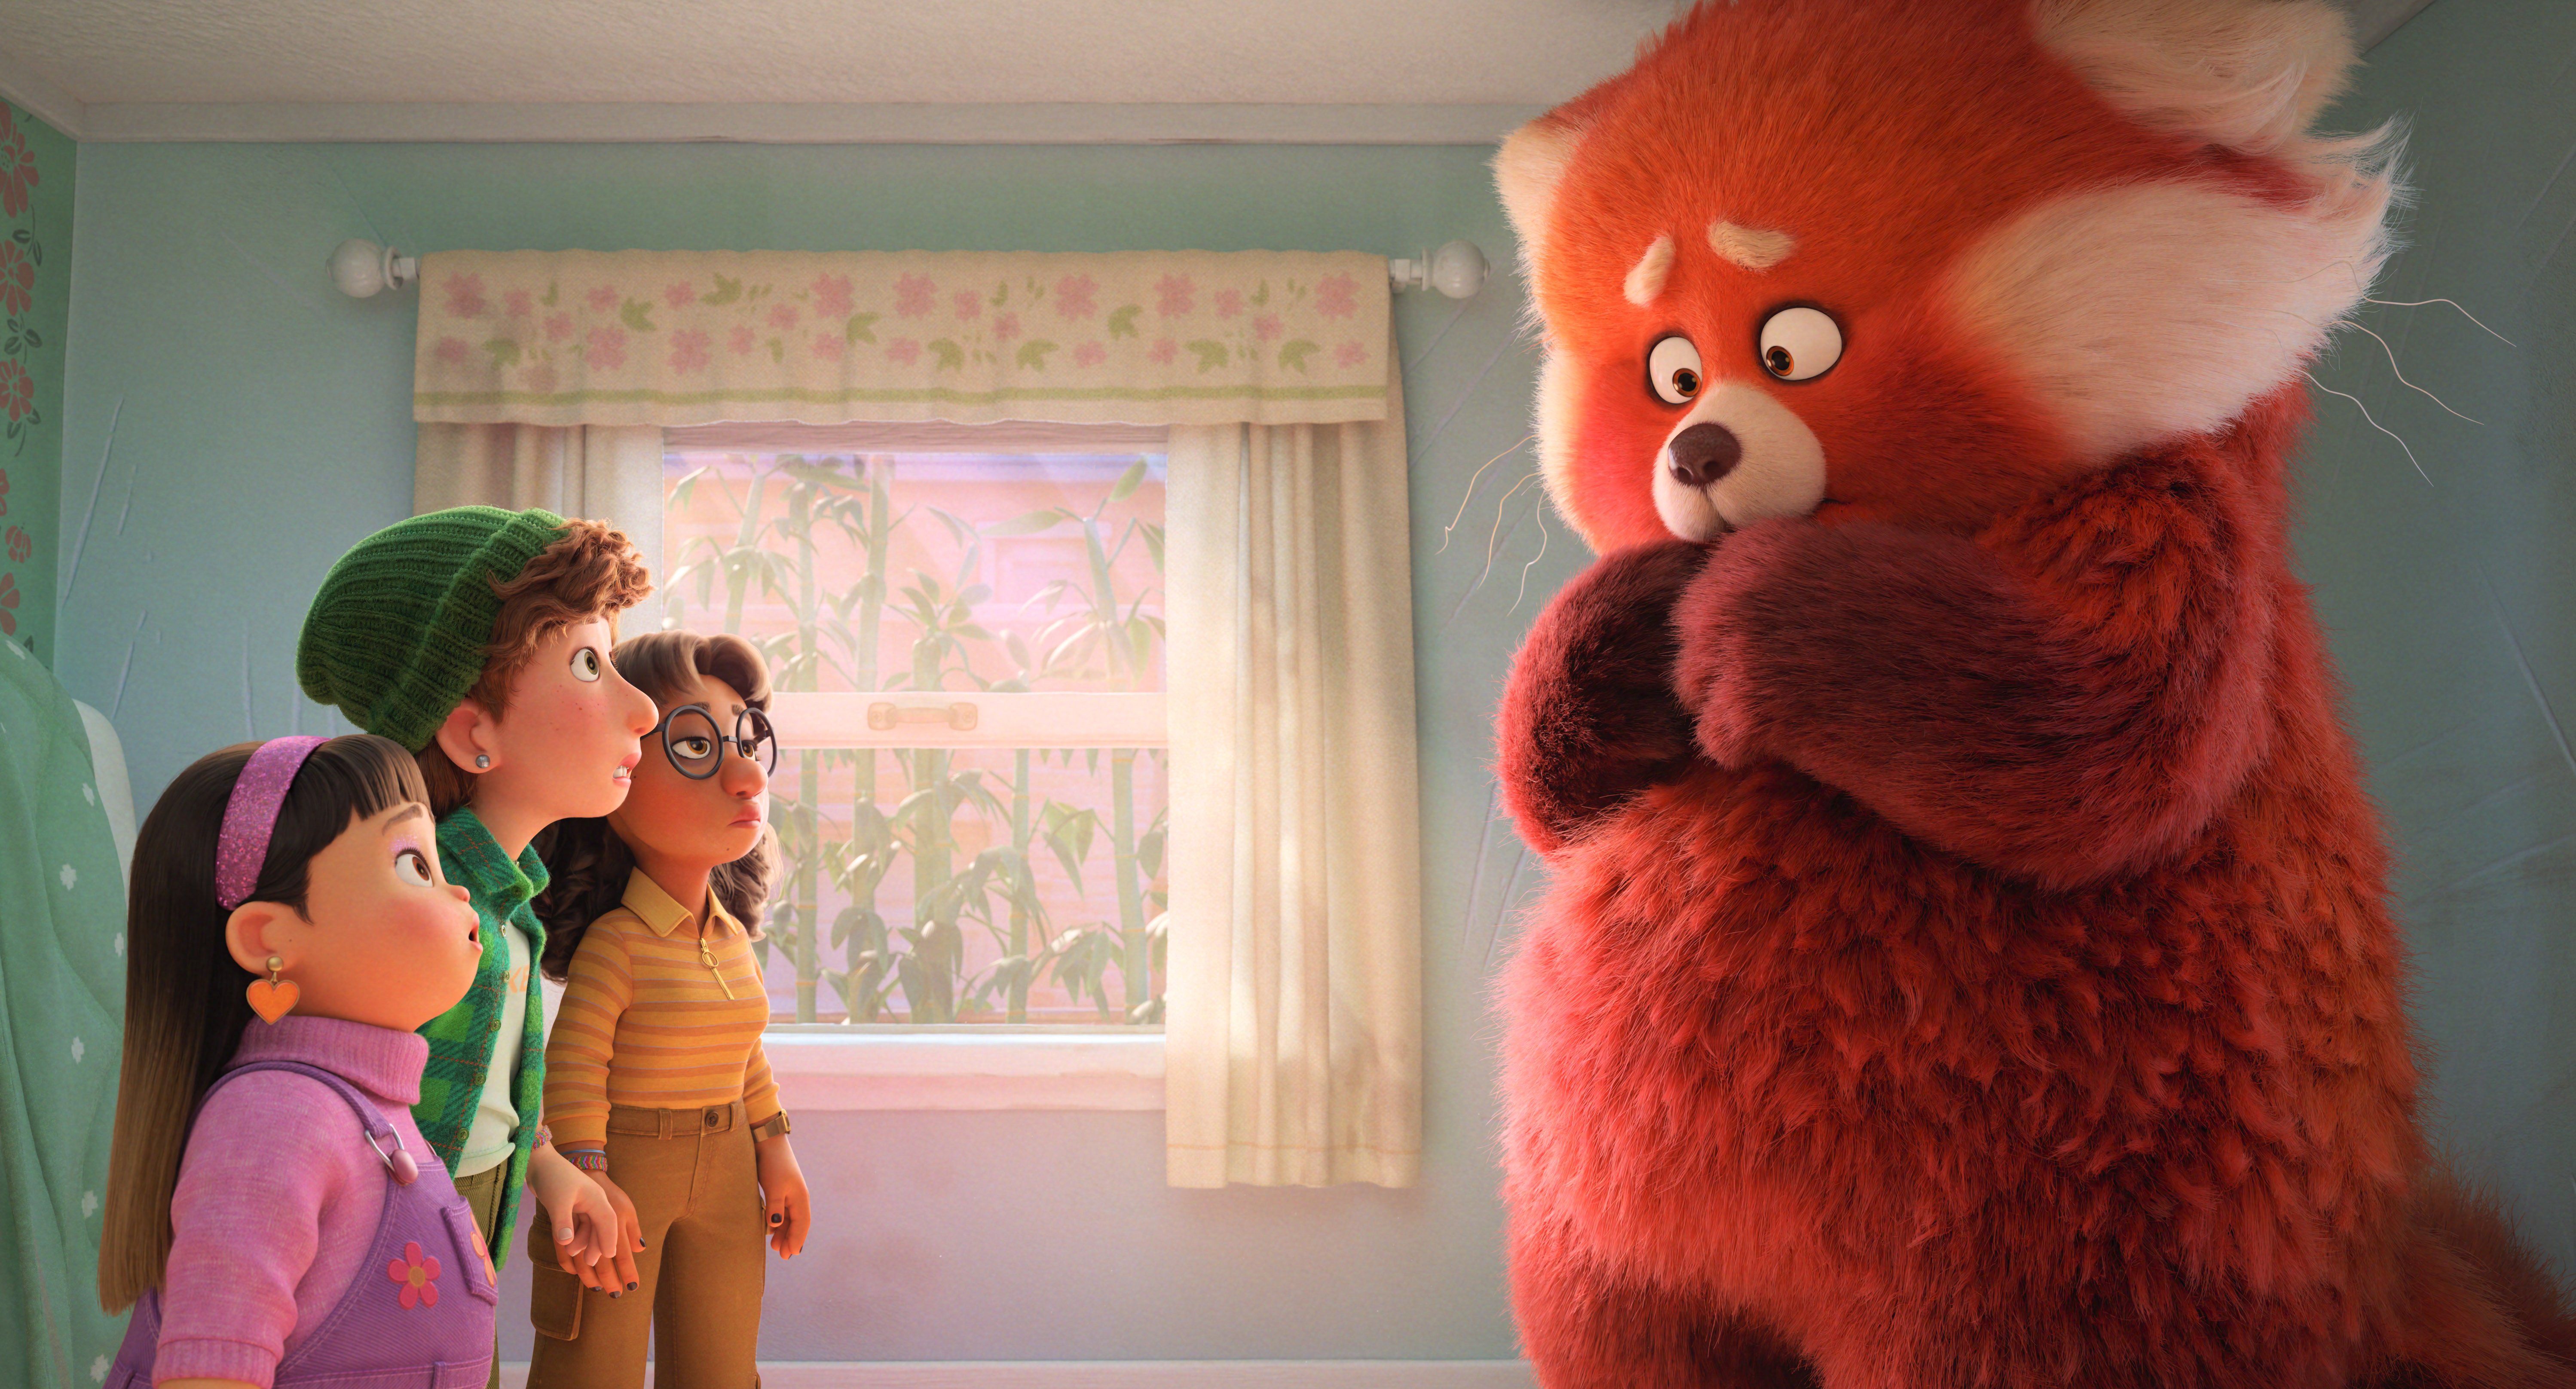 A still from Turning Red, where Meilin's friends are staring at her in her giant red panda form